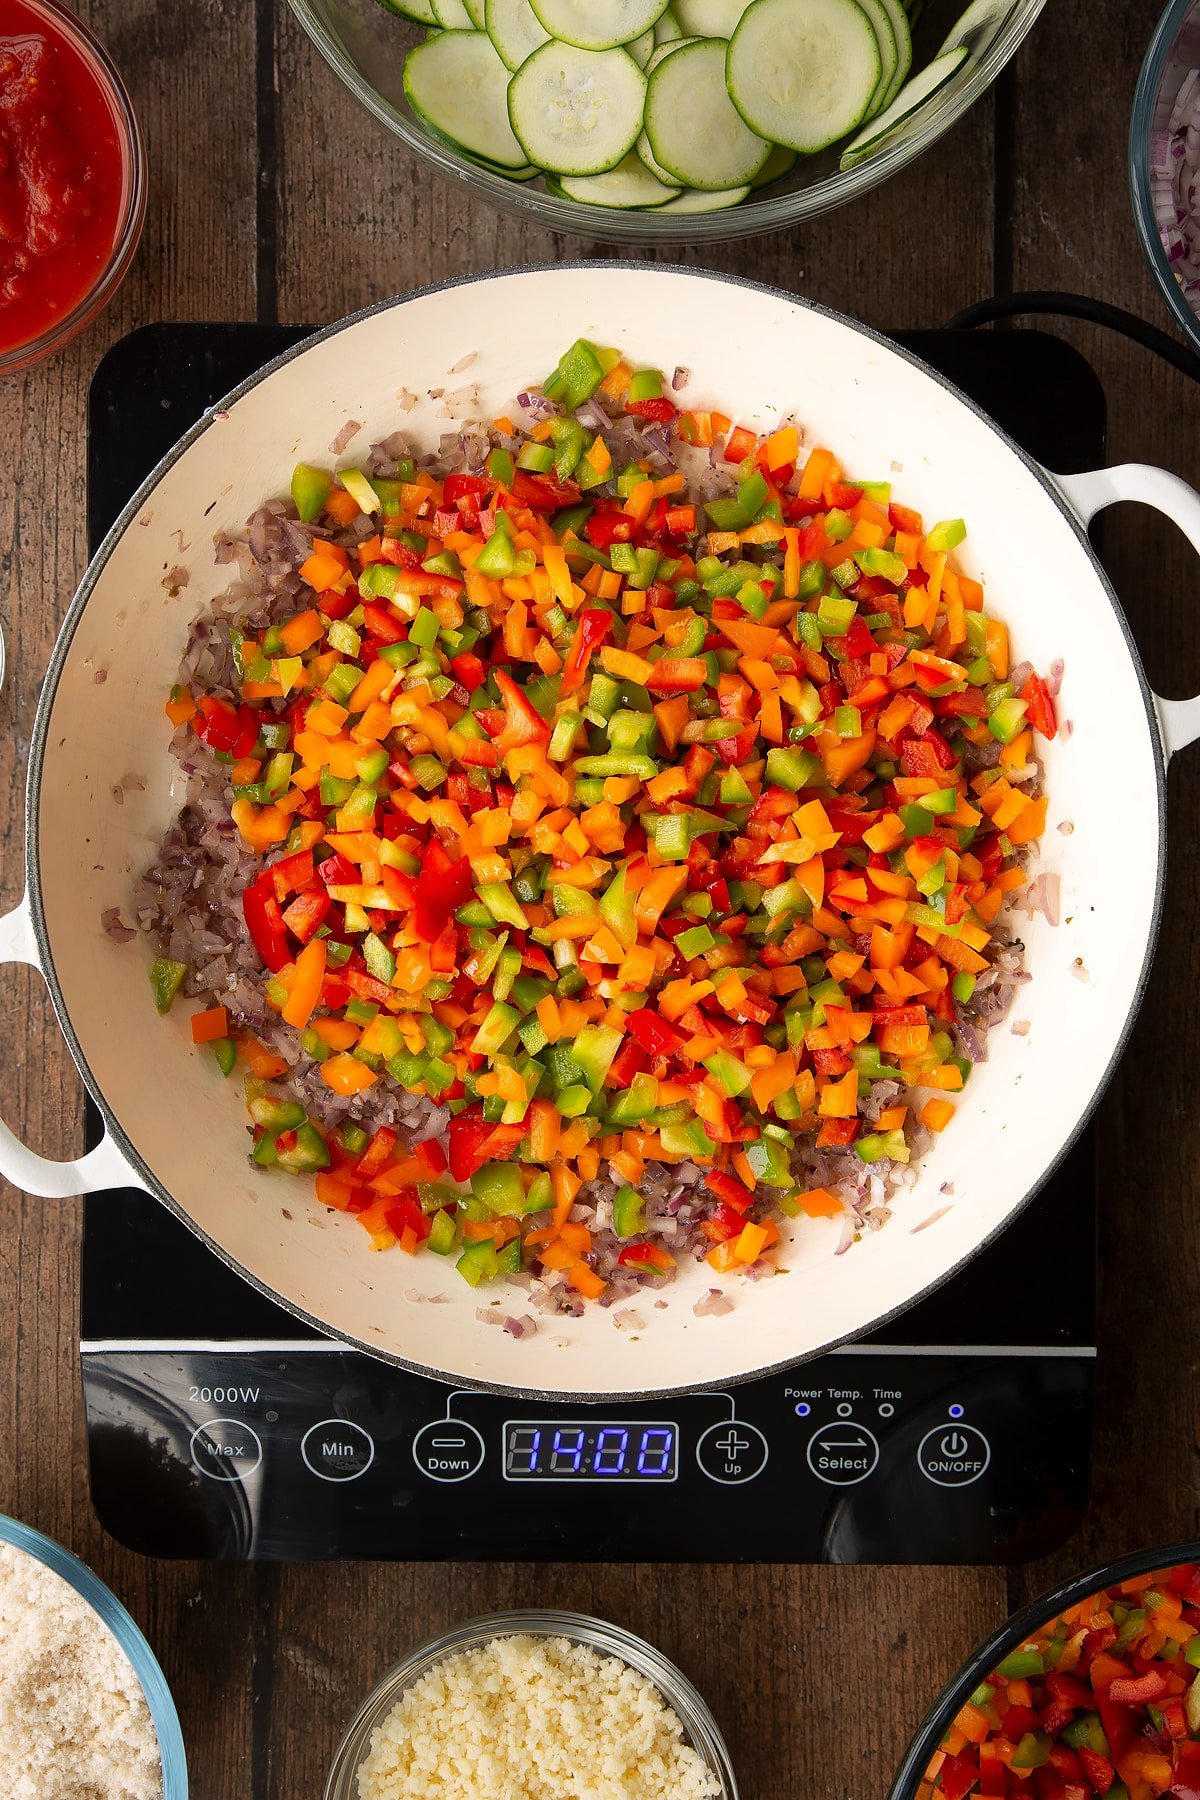 cooked dred onion and garlic mix topped with diced peppers in a large white frying pan on induction hob.